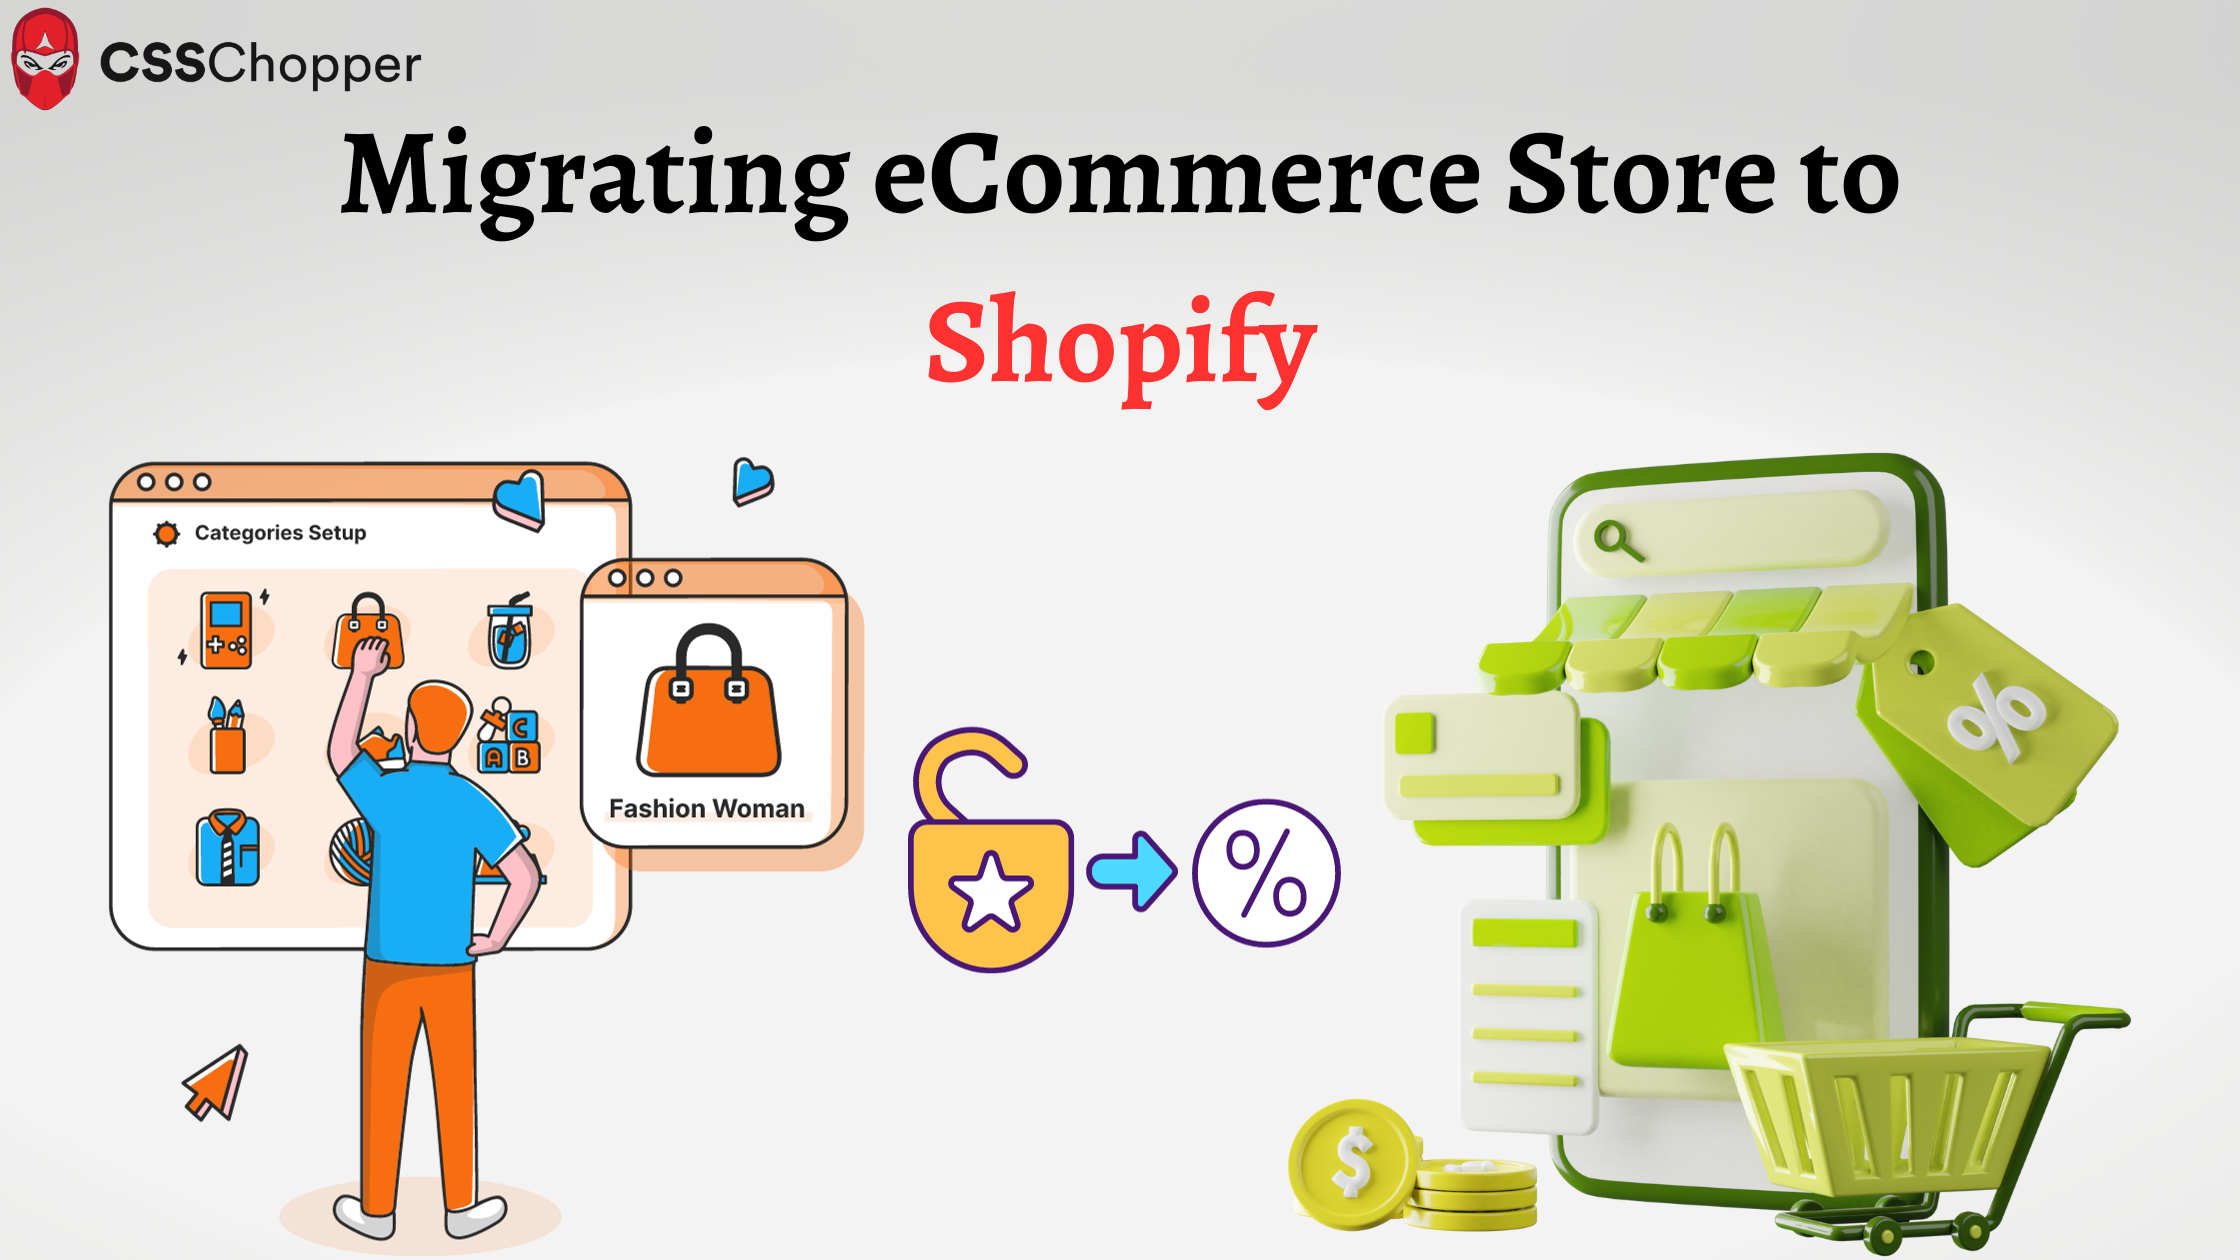 Migrating eCommerce Store to Shopify